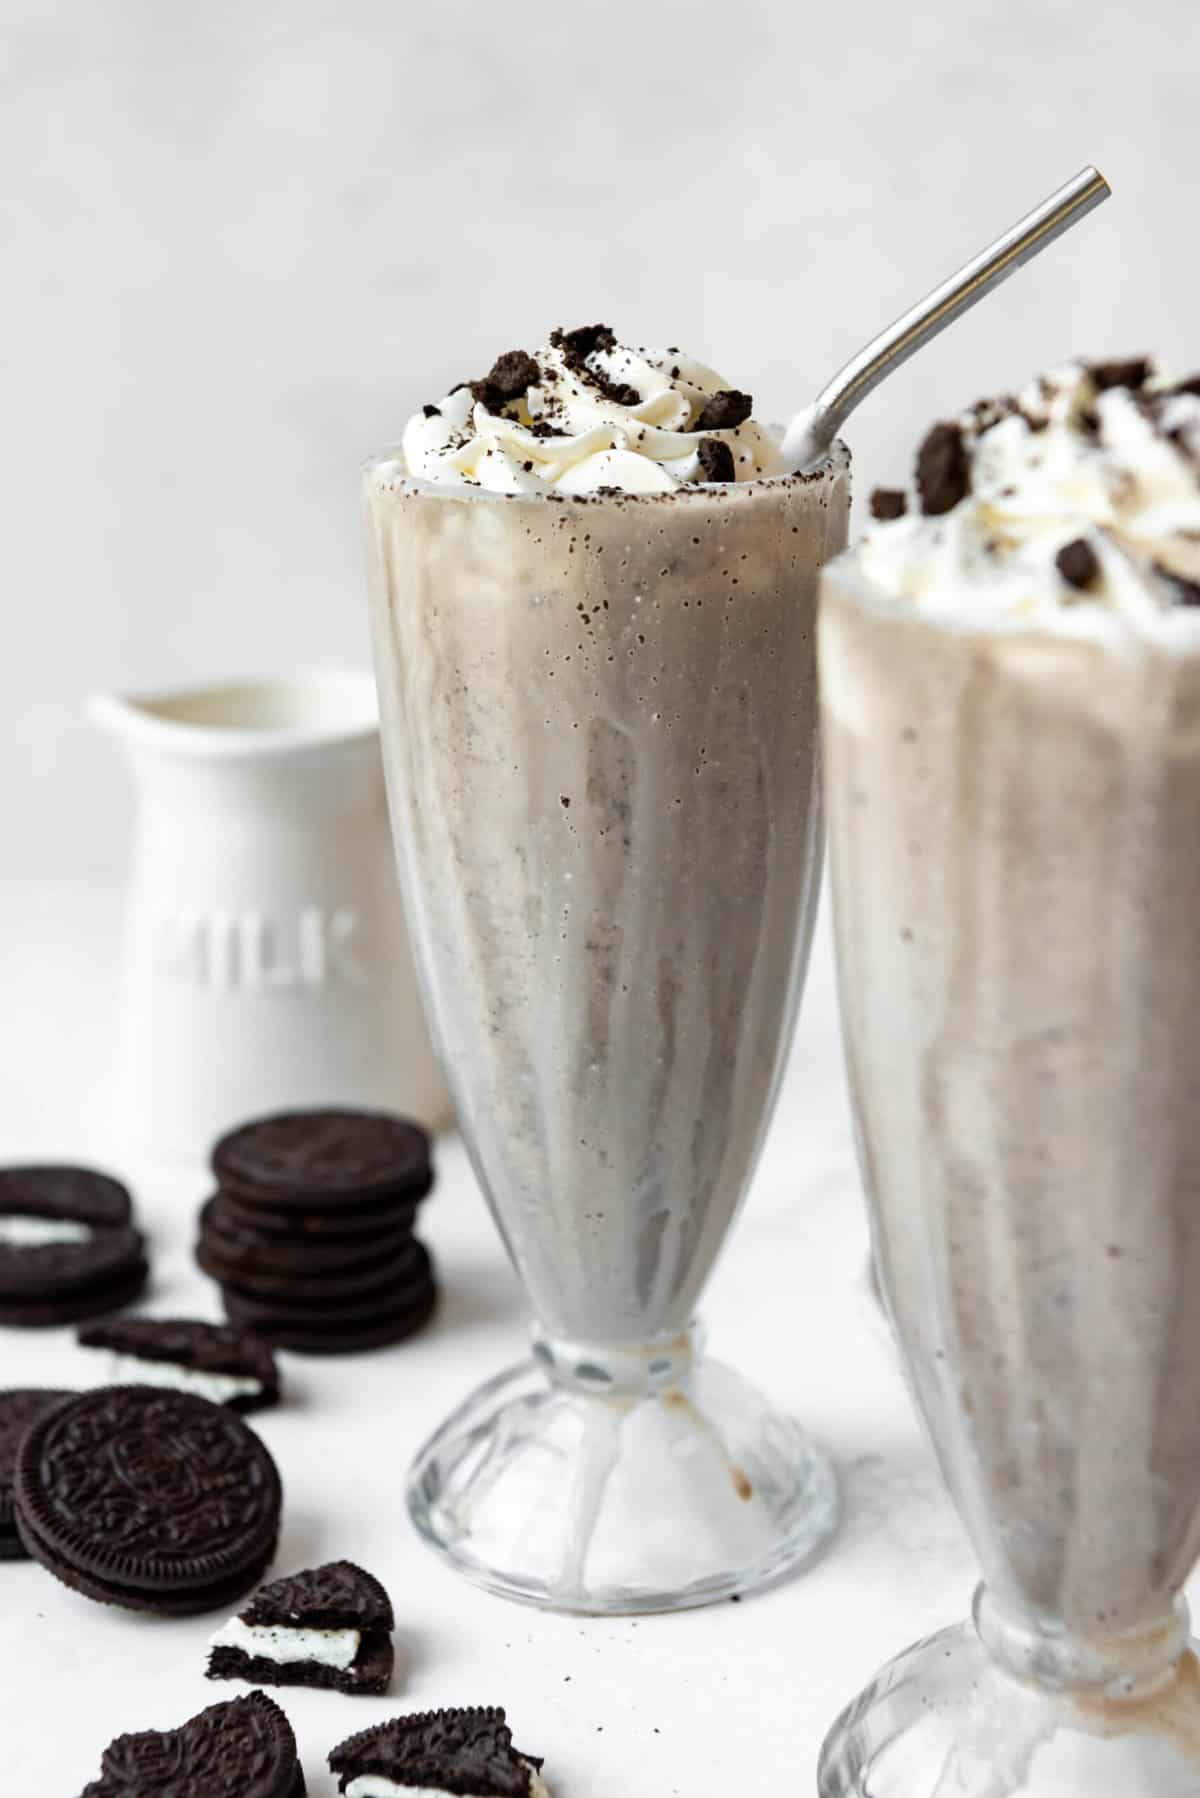 An Oreo milkshake with whipped cream, crushed Oreos, and a straw.